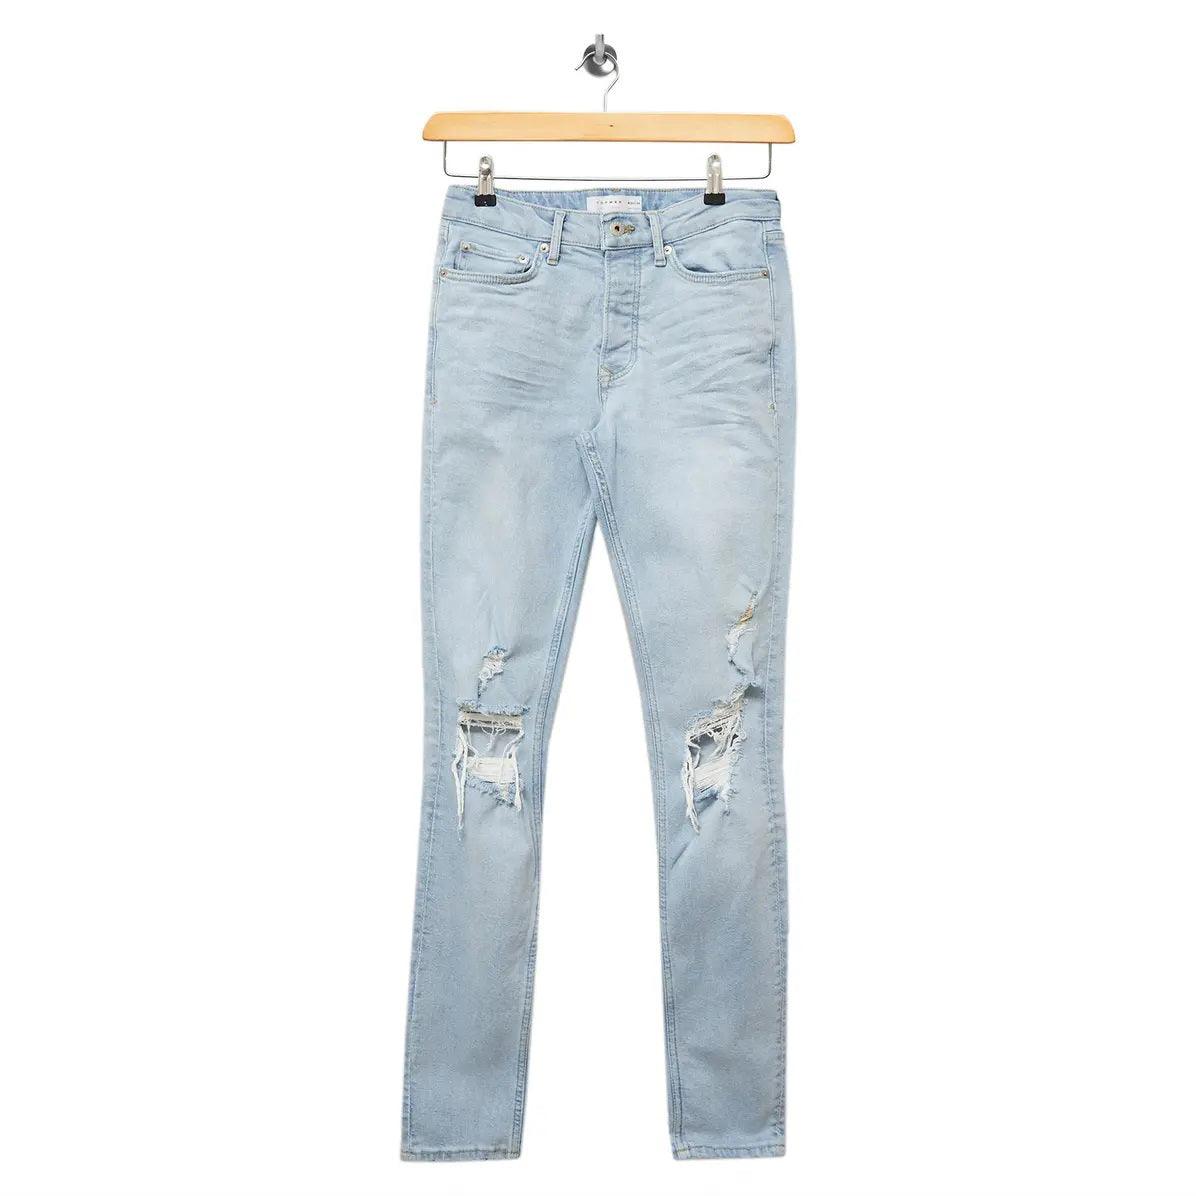 Designer Slim Fit Ripped Stradivarius Jeans For Men With Side Zipper And  Washed Finish From Clothingsupreme, $26.73 | DHgate.Com